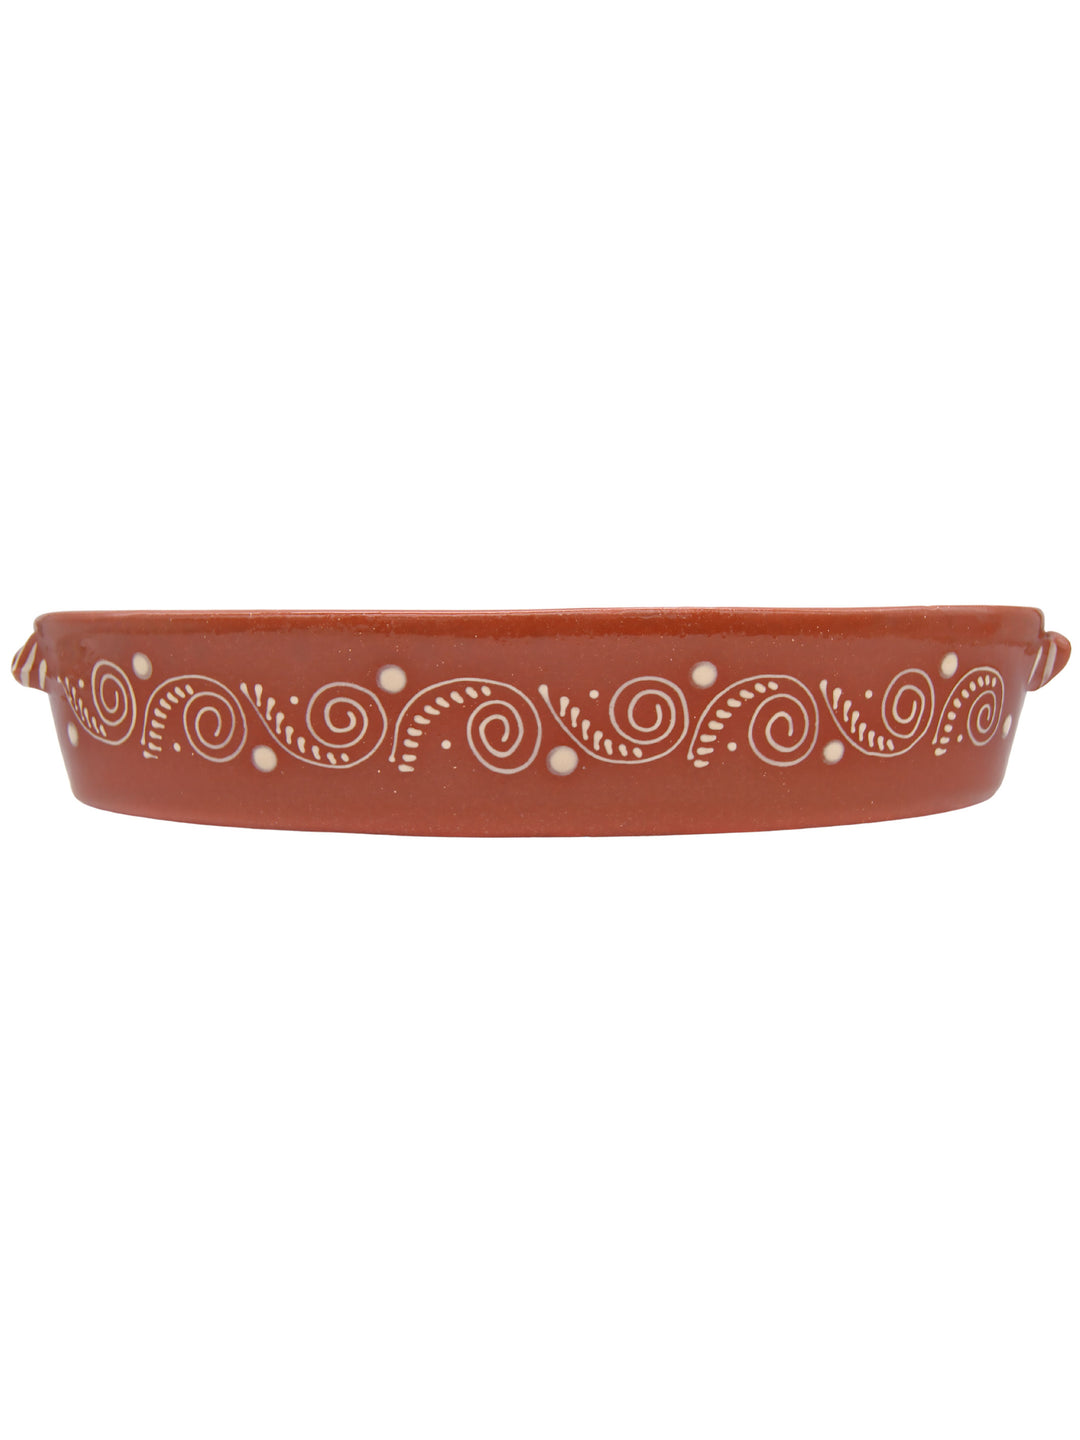 Portuguese Pottery Glazed Terracotta Oval Clay Baking Pan for Oven